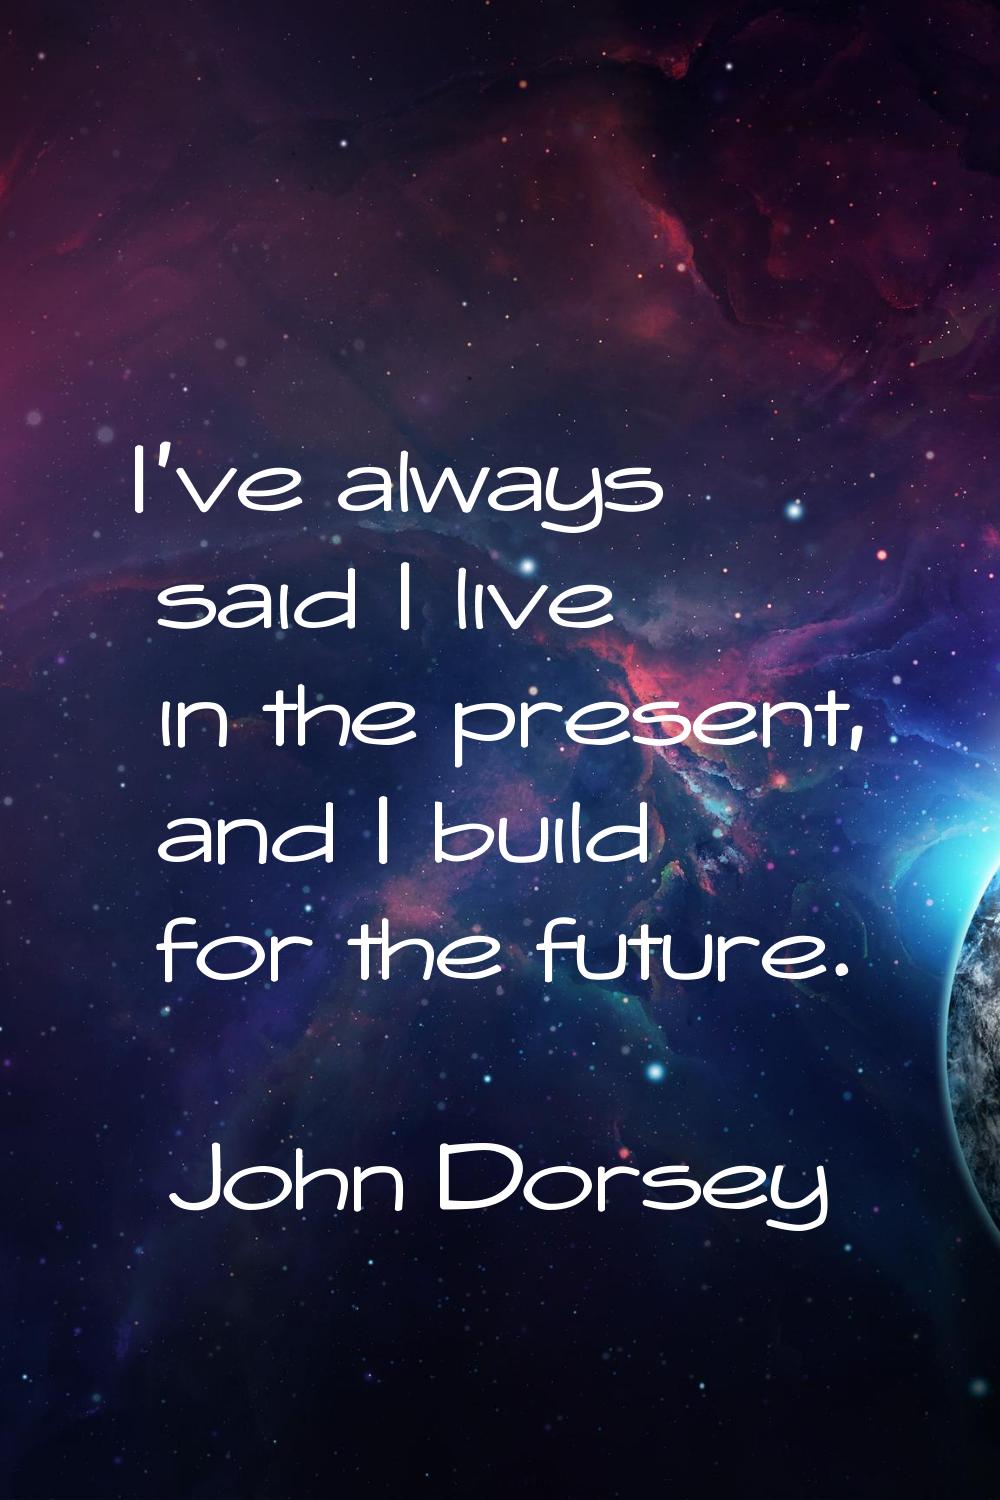 I've always said I live in the present, and I build for the future.